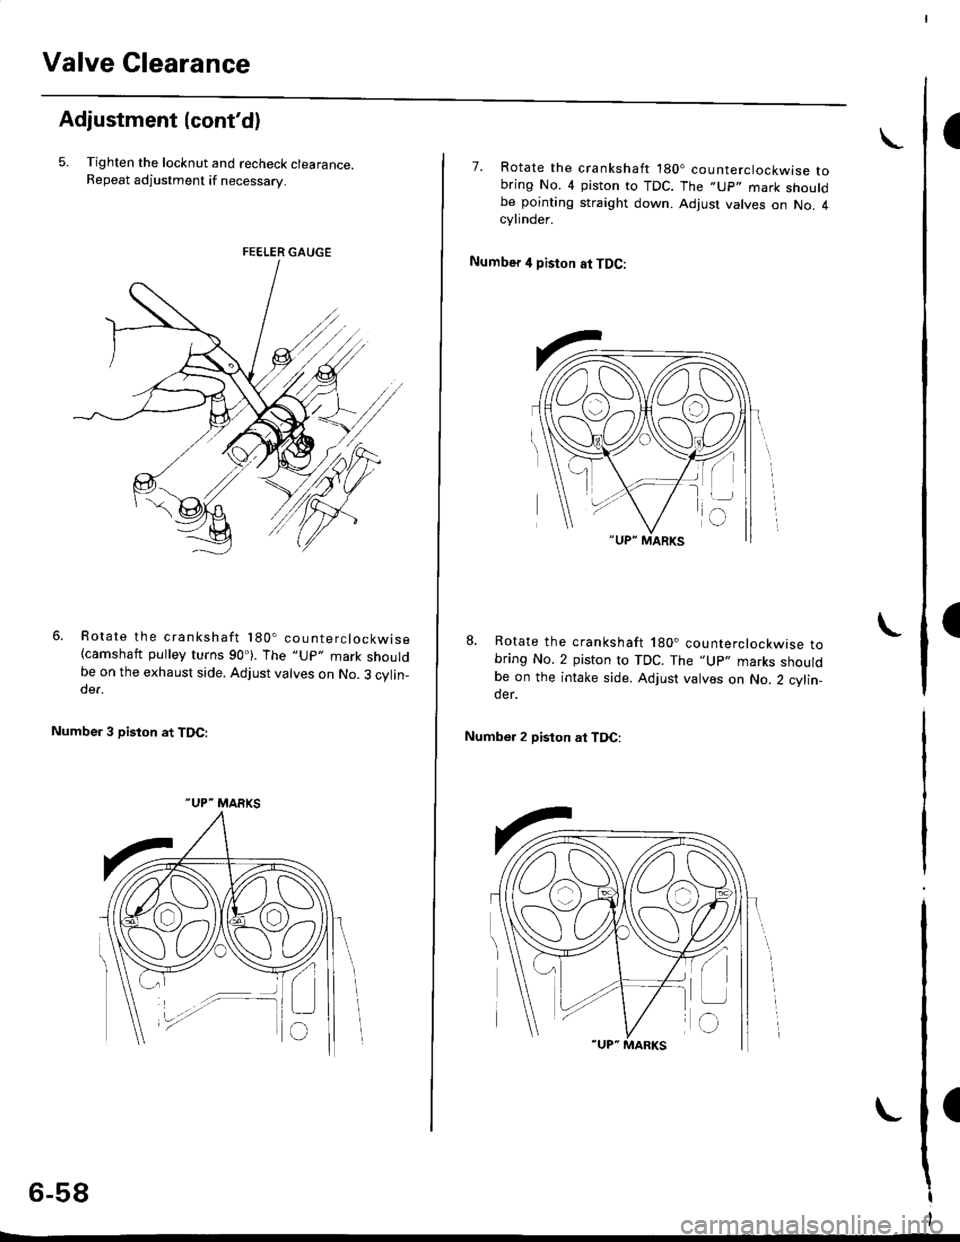 HONDA CIVIC 2000 6.G Workshop Manual Valve Clearance
I
I
I
Adjustment {contd)
5. Tighten the locknut and recheck clearance.Repeat adjustment if necessary.
Rotate the crankshaft 180. counterclockwise(camshaft pulley turns 90). The "Up" 